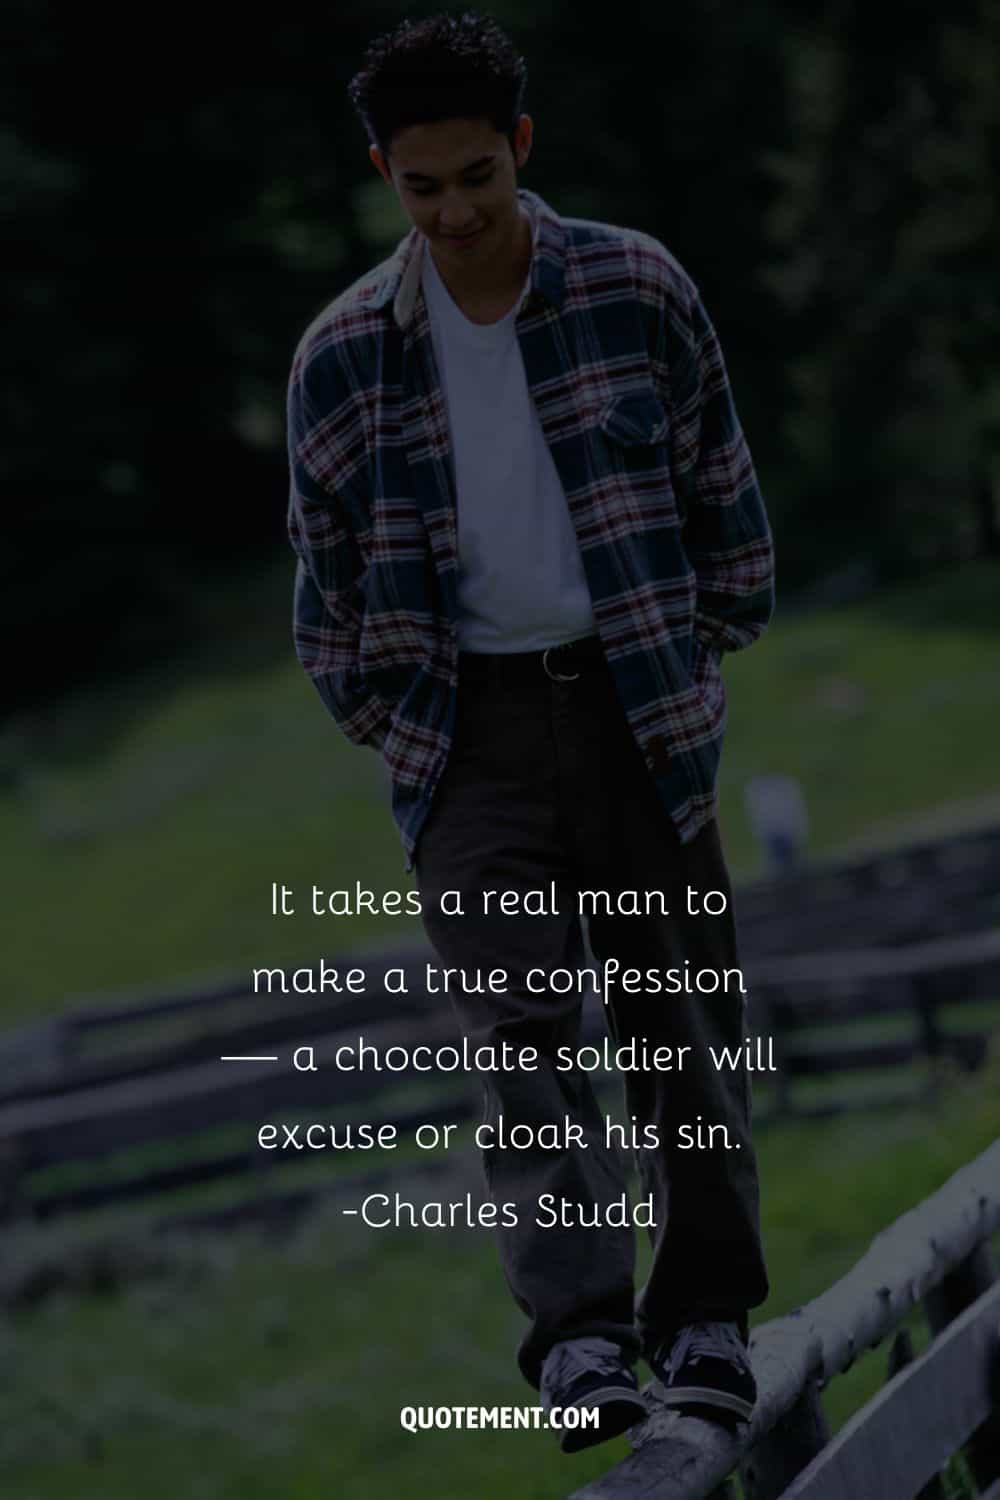 It takes a real man to make a true confession — a chocolate soldier will excuse or cloak his sin